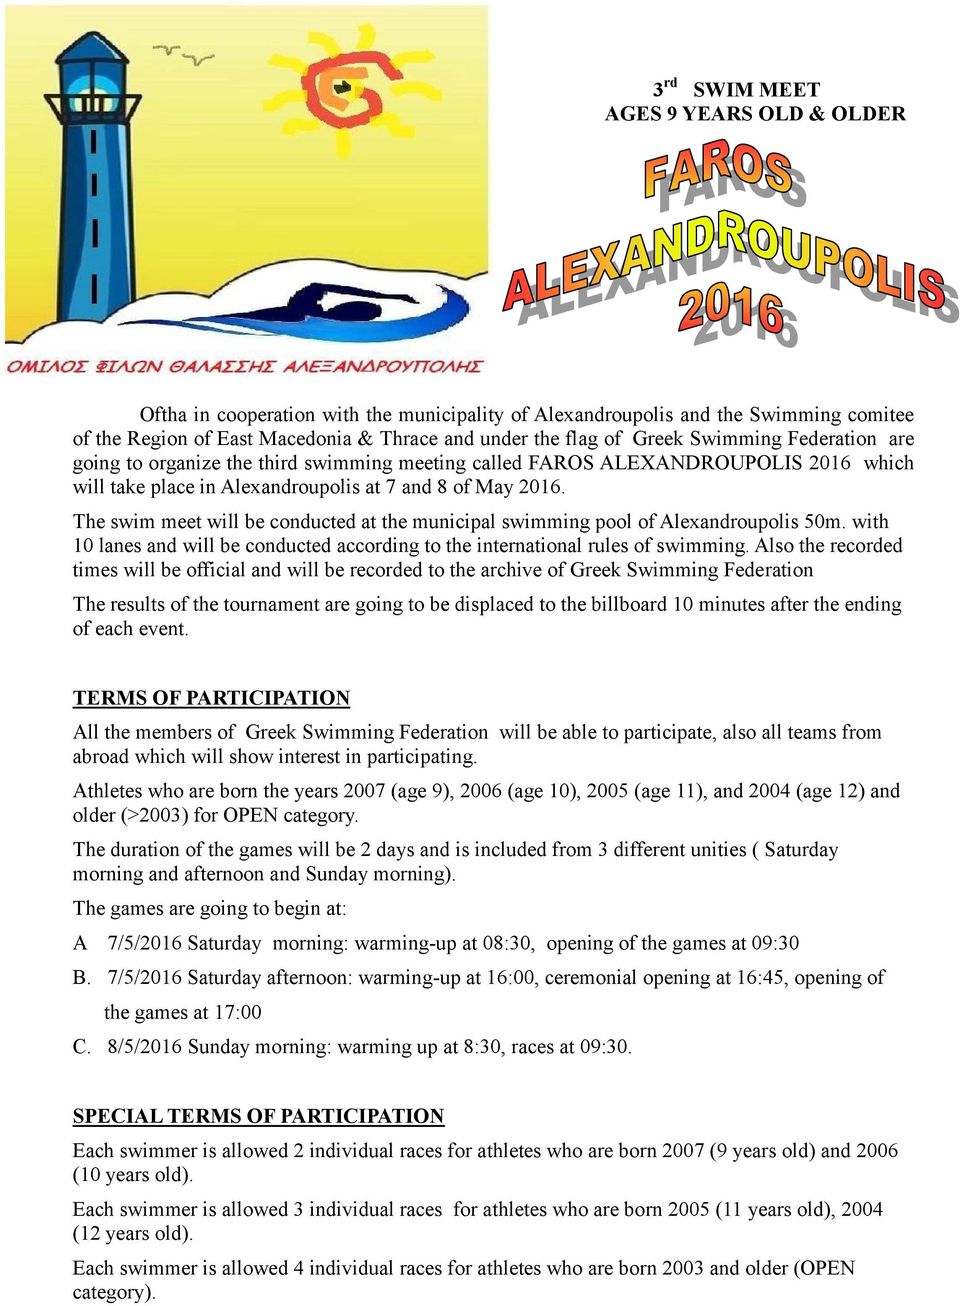 The swim meet will be conducted at the municipal swimming pool of Alexandroupolis 50m. with 10 lanes and will be conducted according to the international rules of swimming.